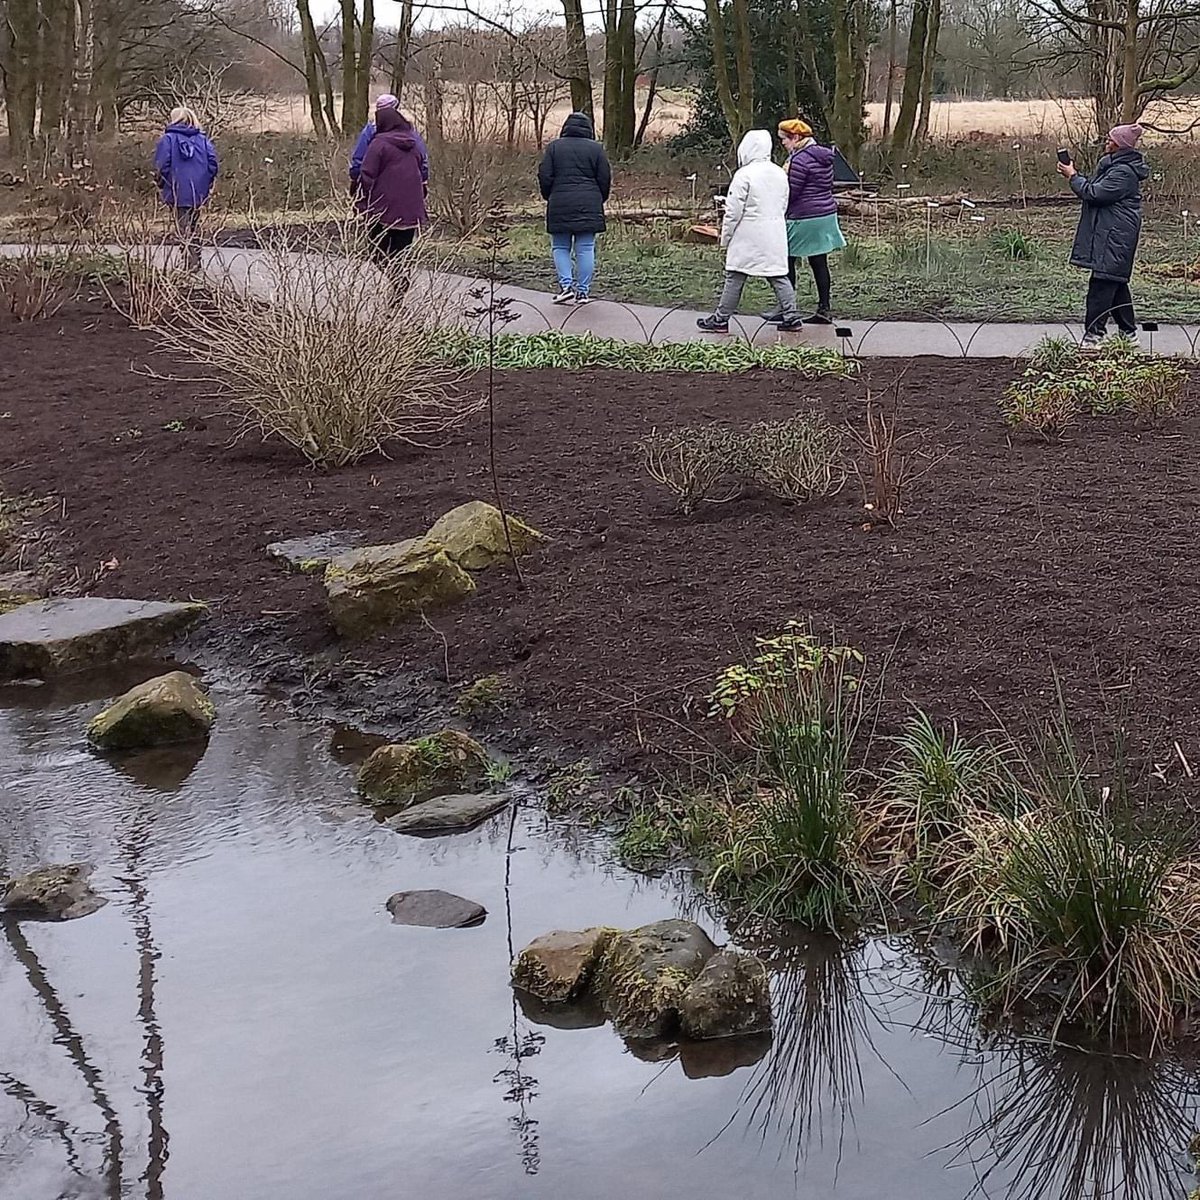 Our Pennine Care Nature & Wellbeing groups enjoyed trips to the RHS Bridgewater over the last week!🌿🌸 The fantastic RHS staff and volunteers gave us a tour of the site and provided green activities. It was a great way to get know a fabulous greenspace right on our doorstep!